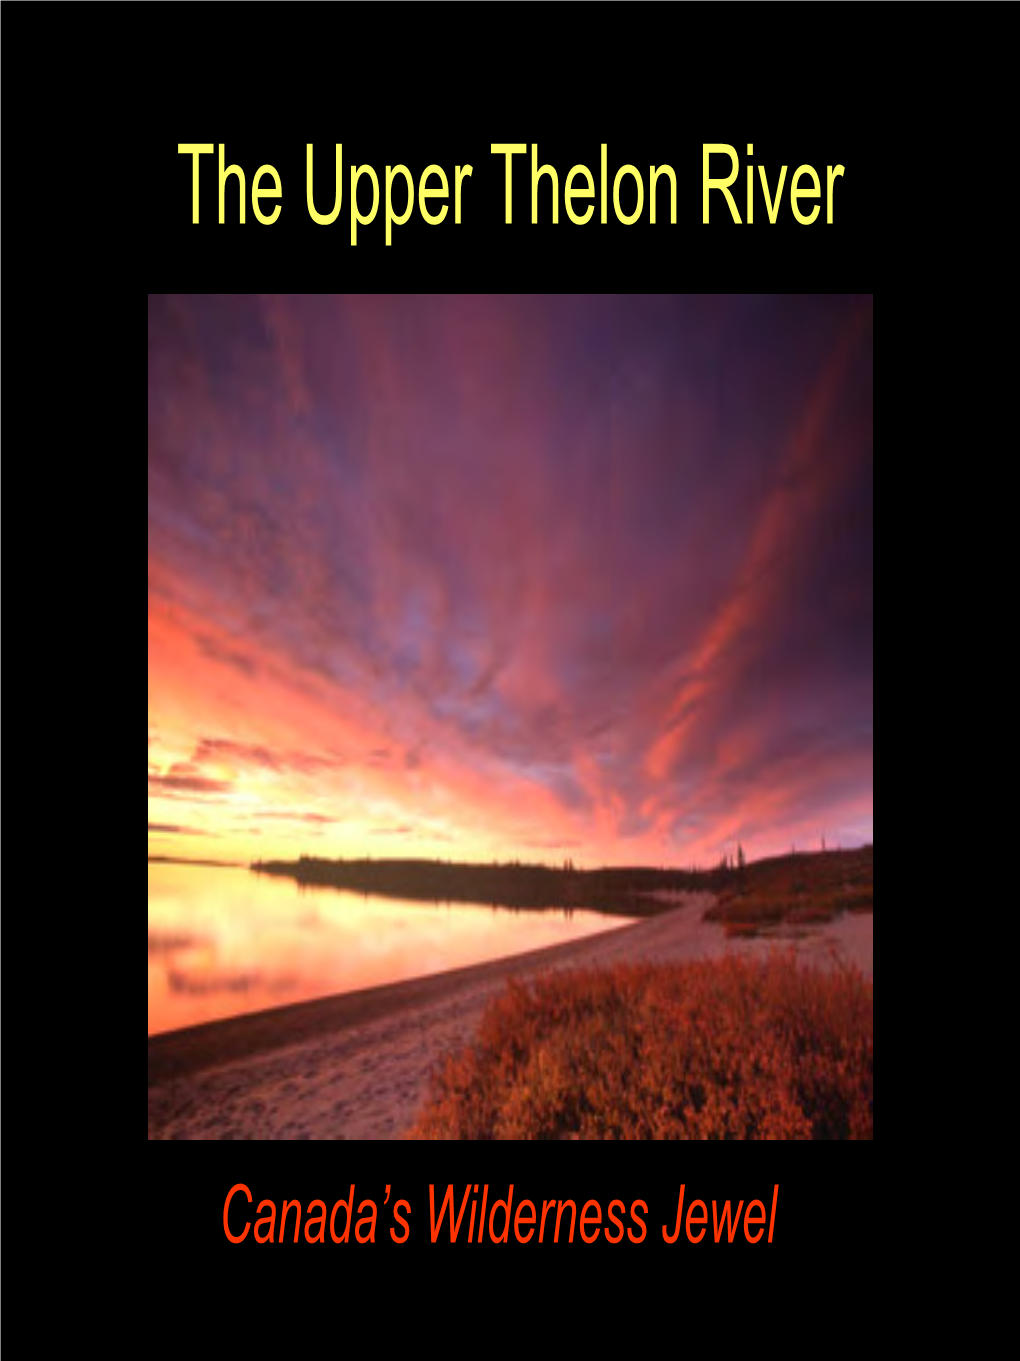 The Upper Thelon River